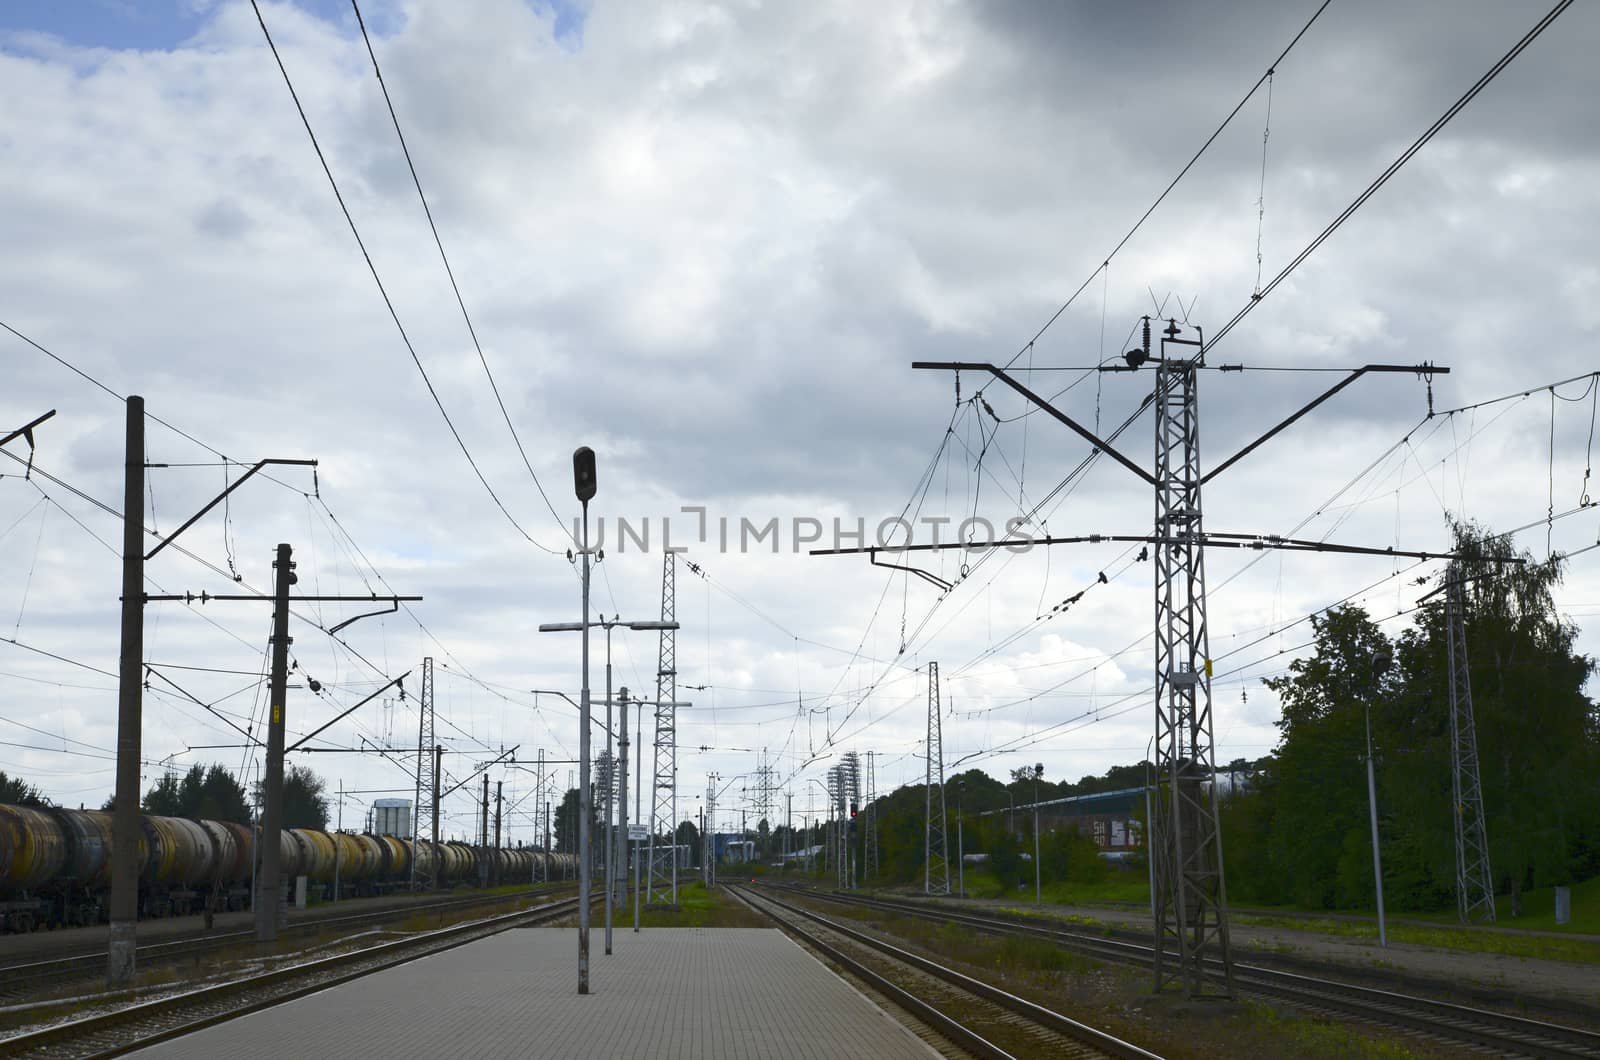 Photo of a railway station platform with electricity transmission system. Taken in Riga, Latvia.